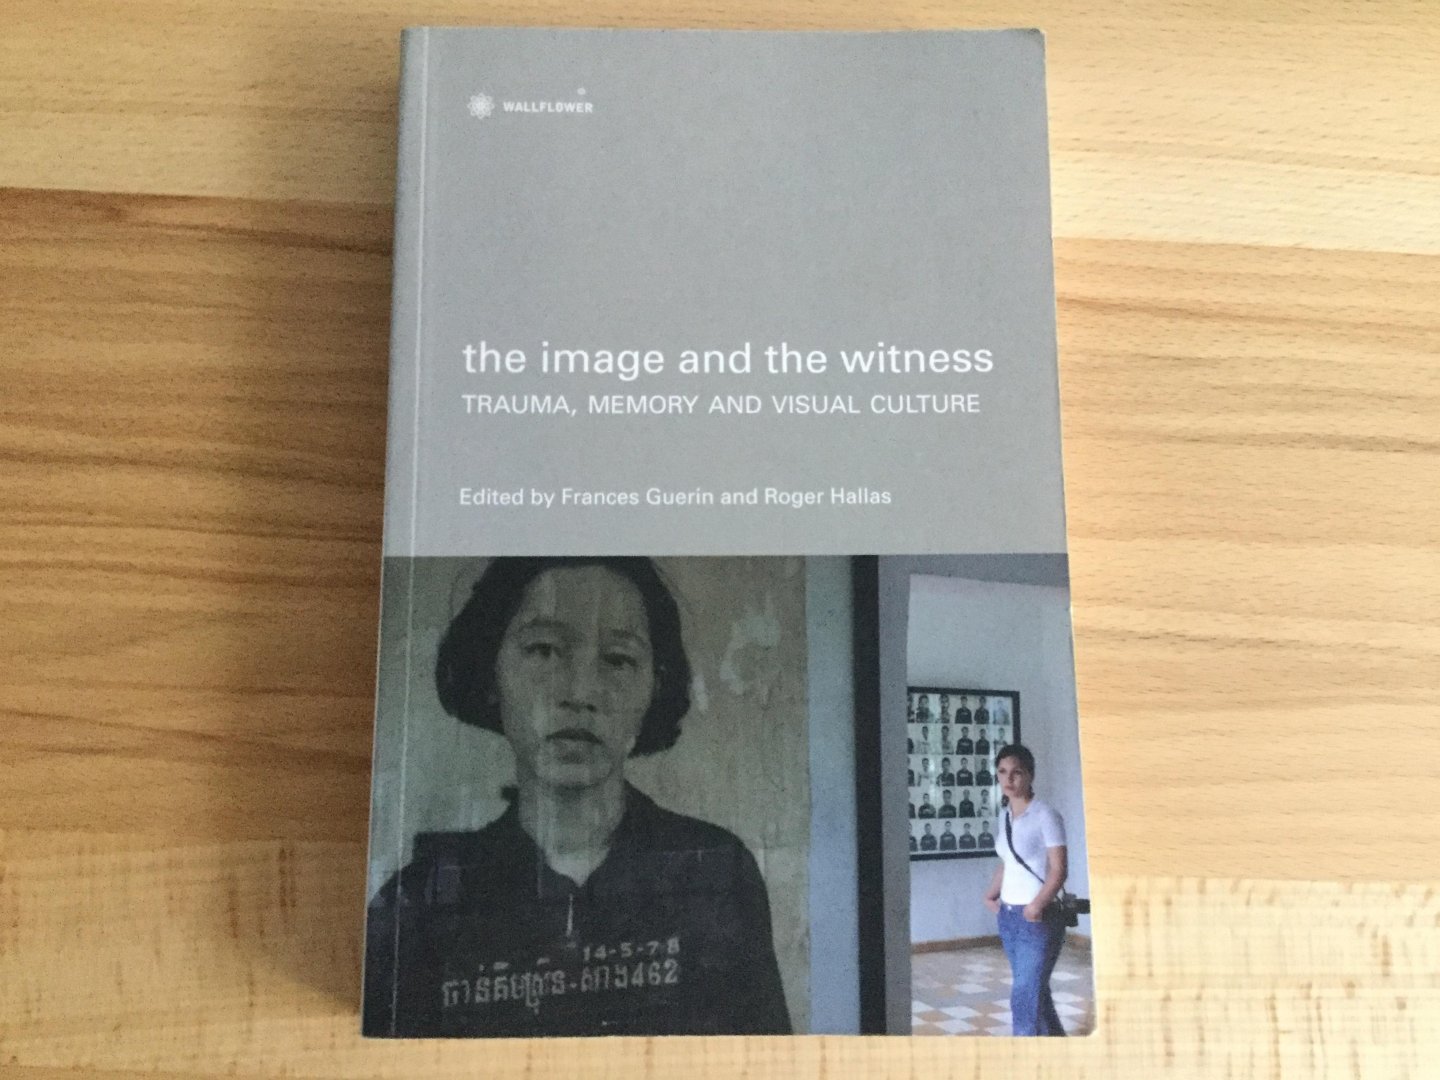 Frances Guerin, Roger Hallas - The Image and the Witness - Trauma, Memory, and Visual Culture